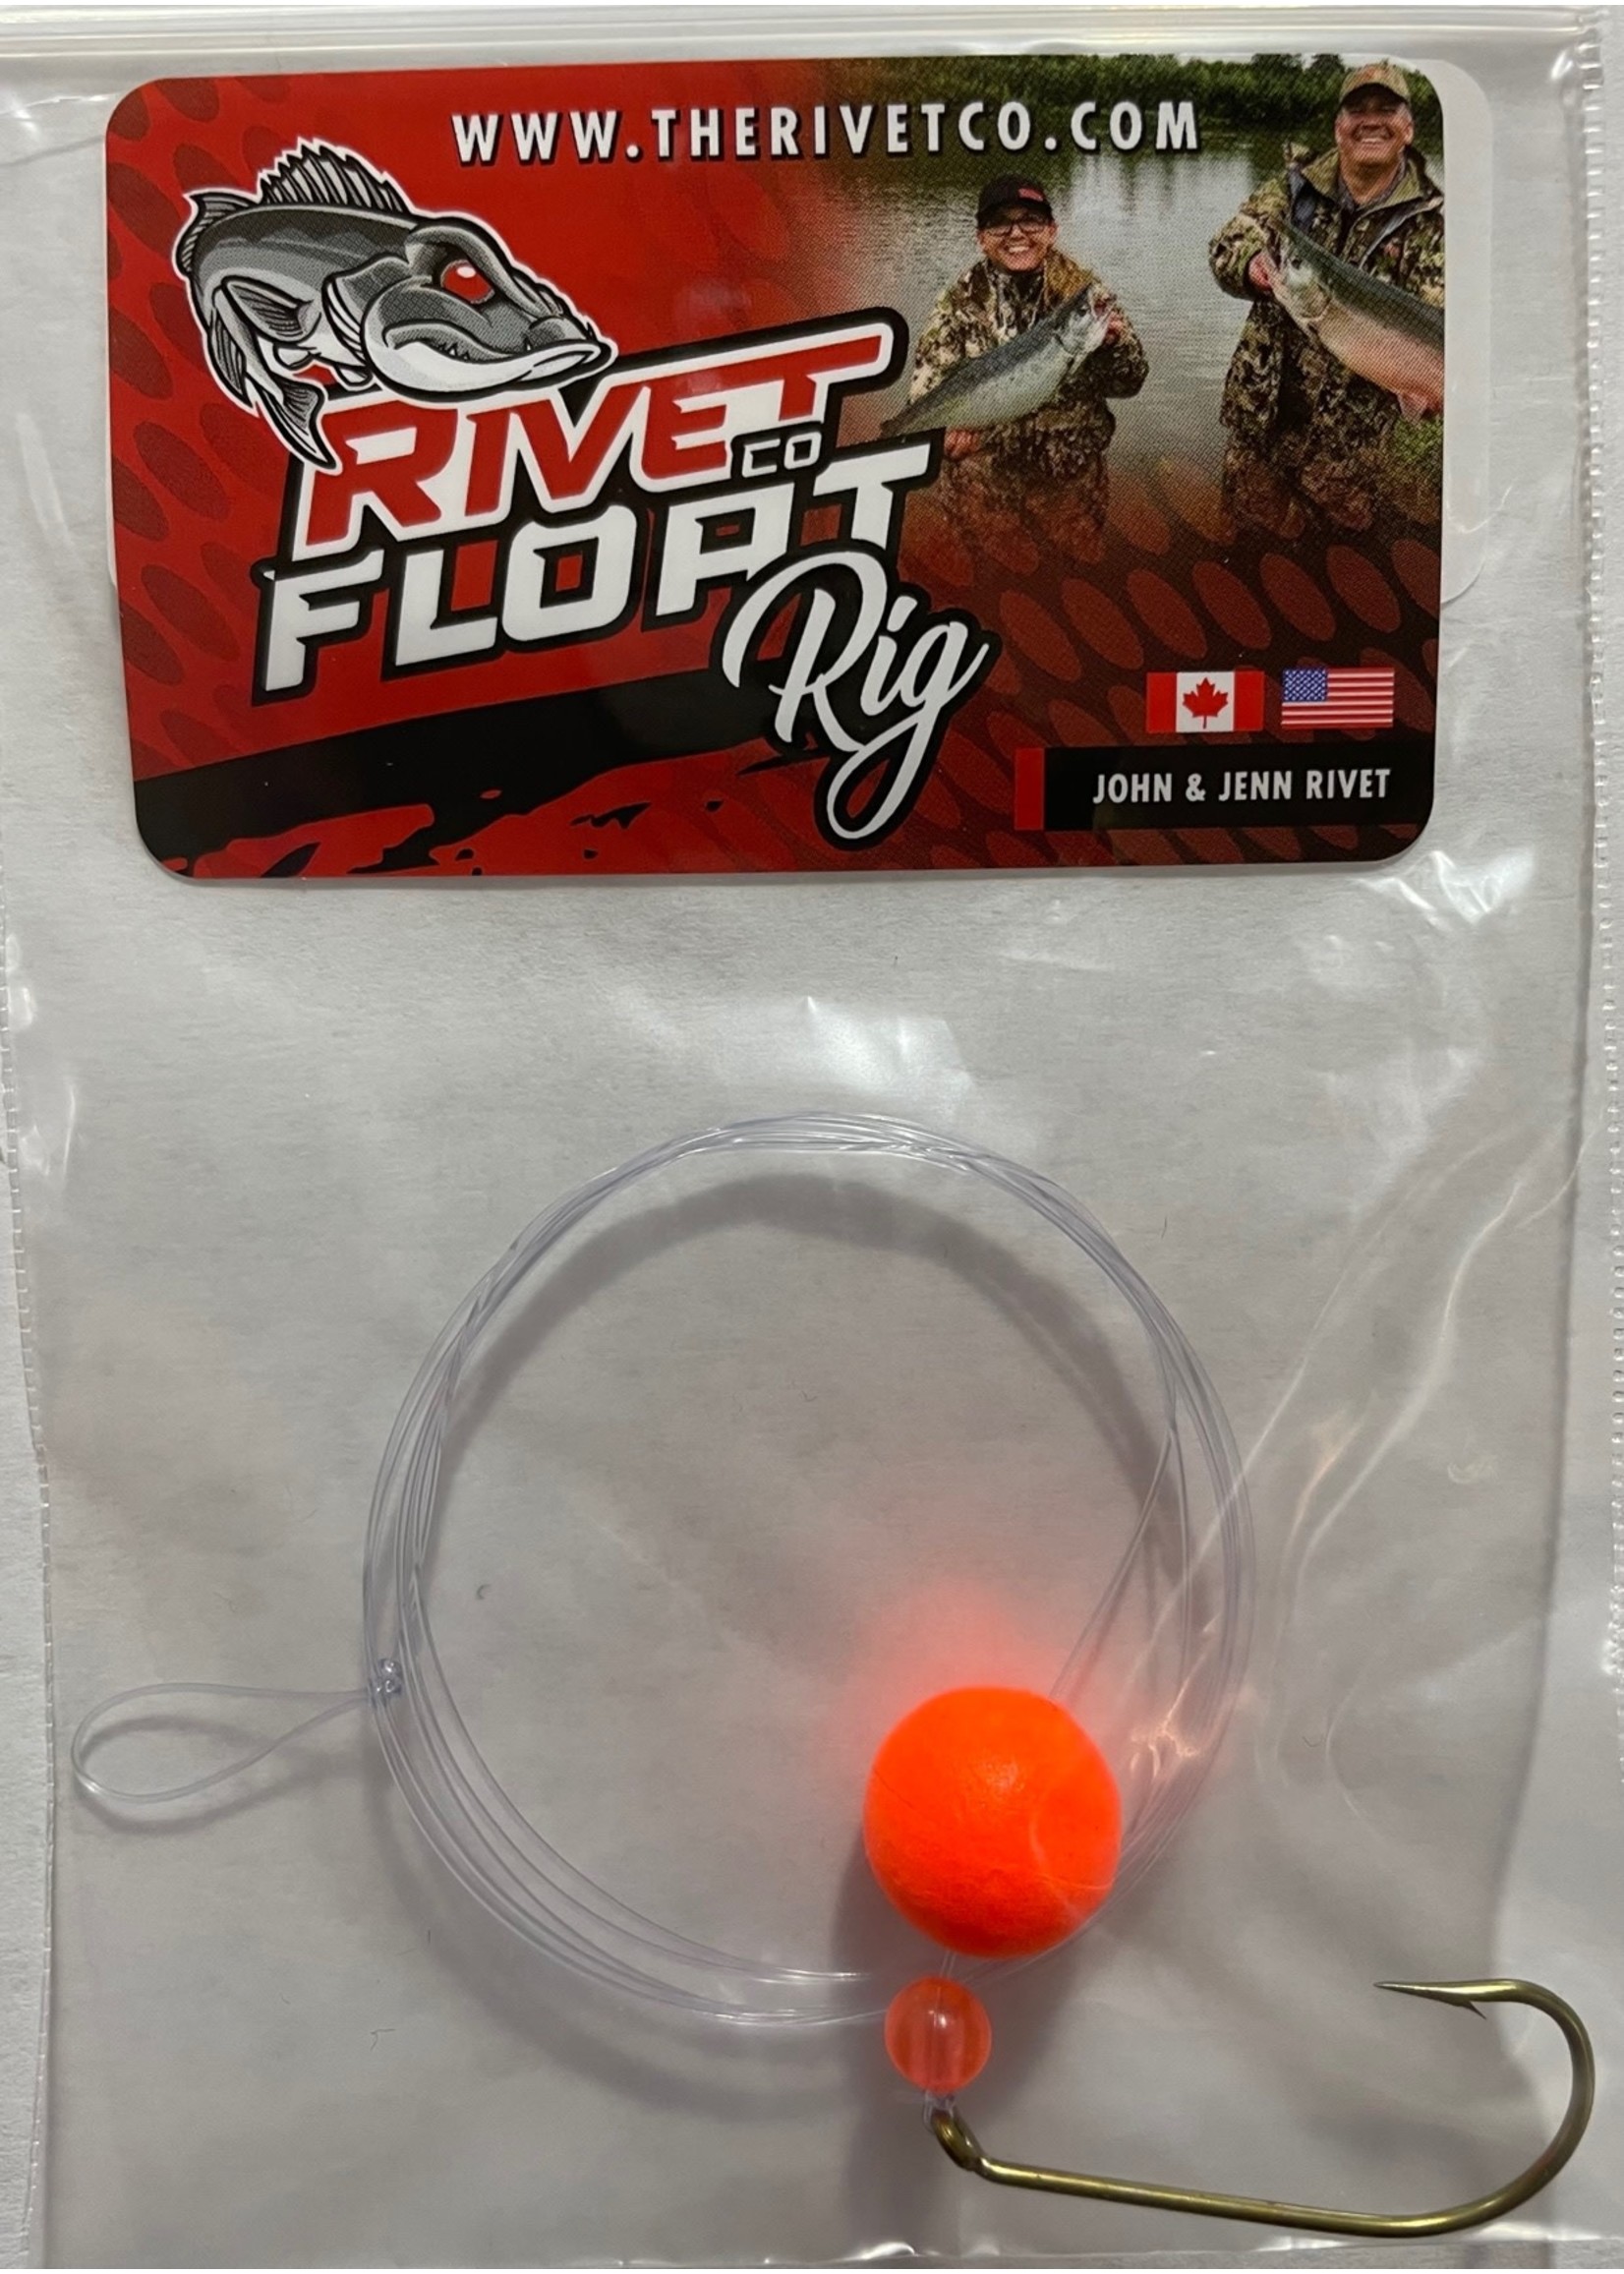 THE RIVET CO THE RIVER CO BALL FLOAT RIG